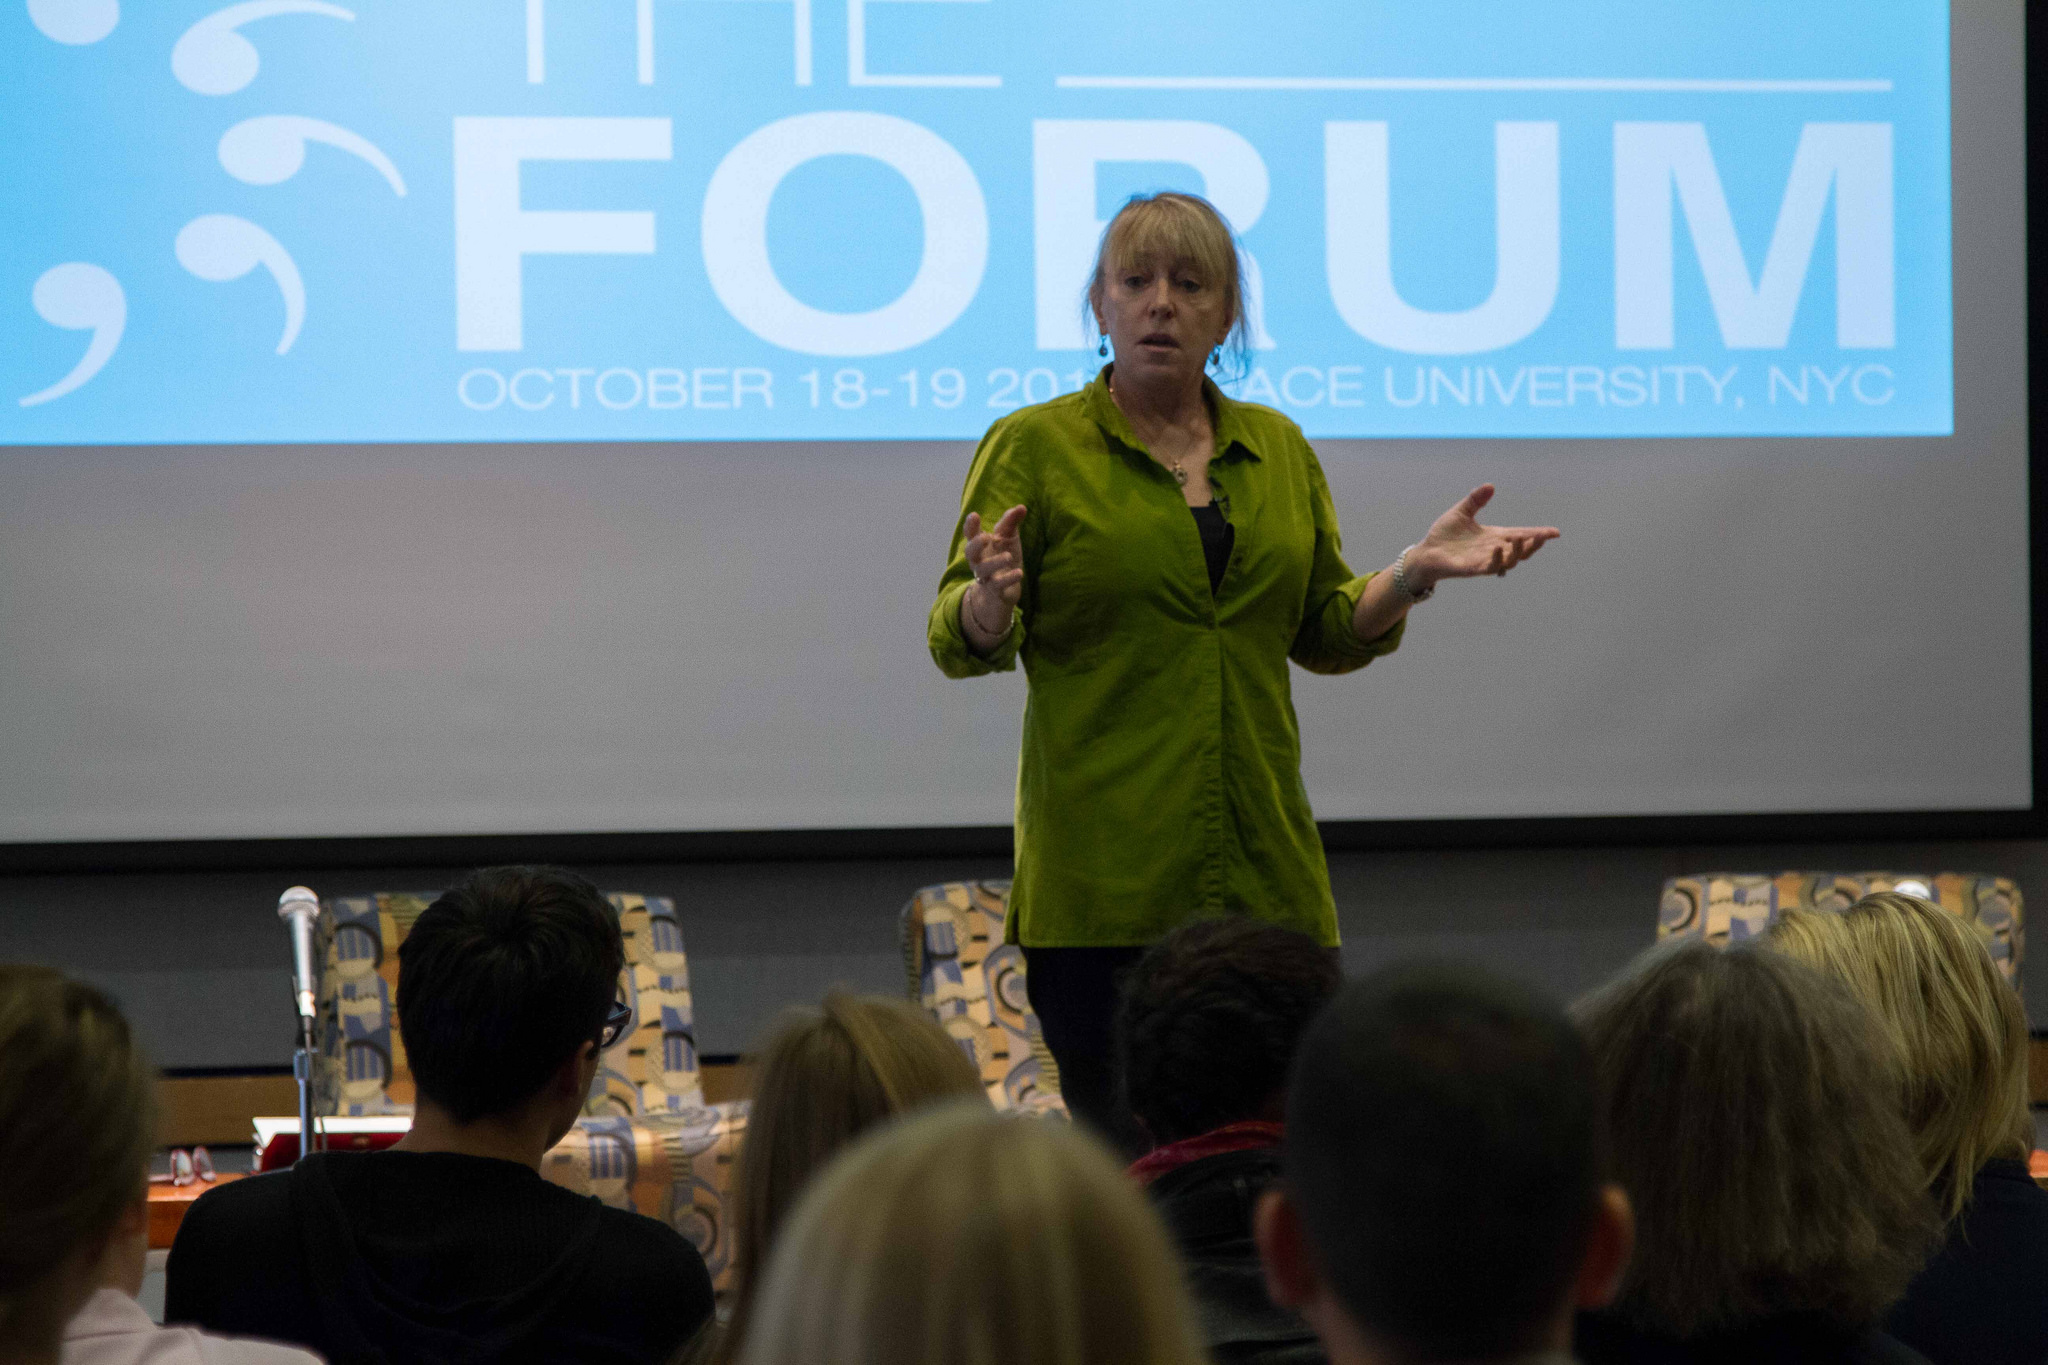 Nobel Peace Prize Laureate Jody Williams delivering keynote address at the 2014 Disarmament Forum at Pace University New York City. Photo: Control Arms.